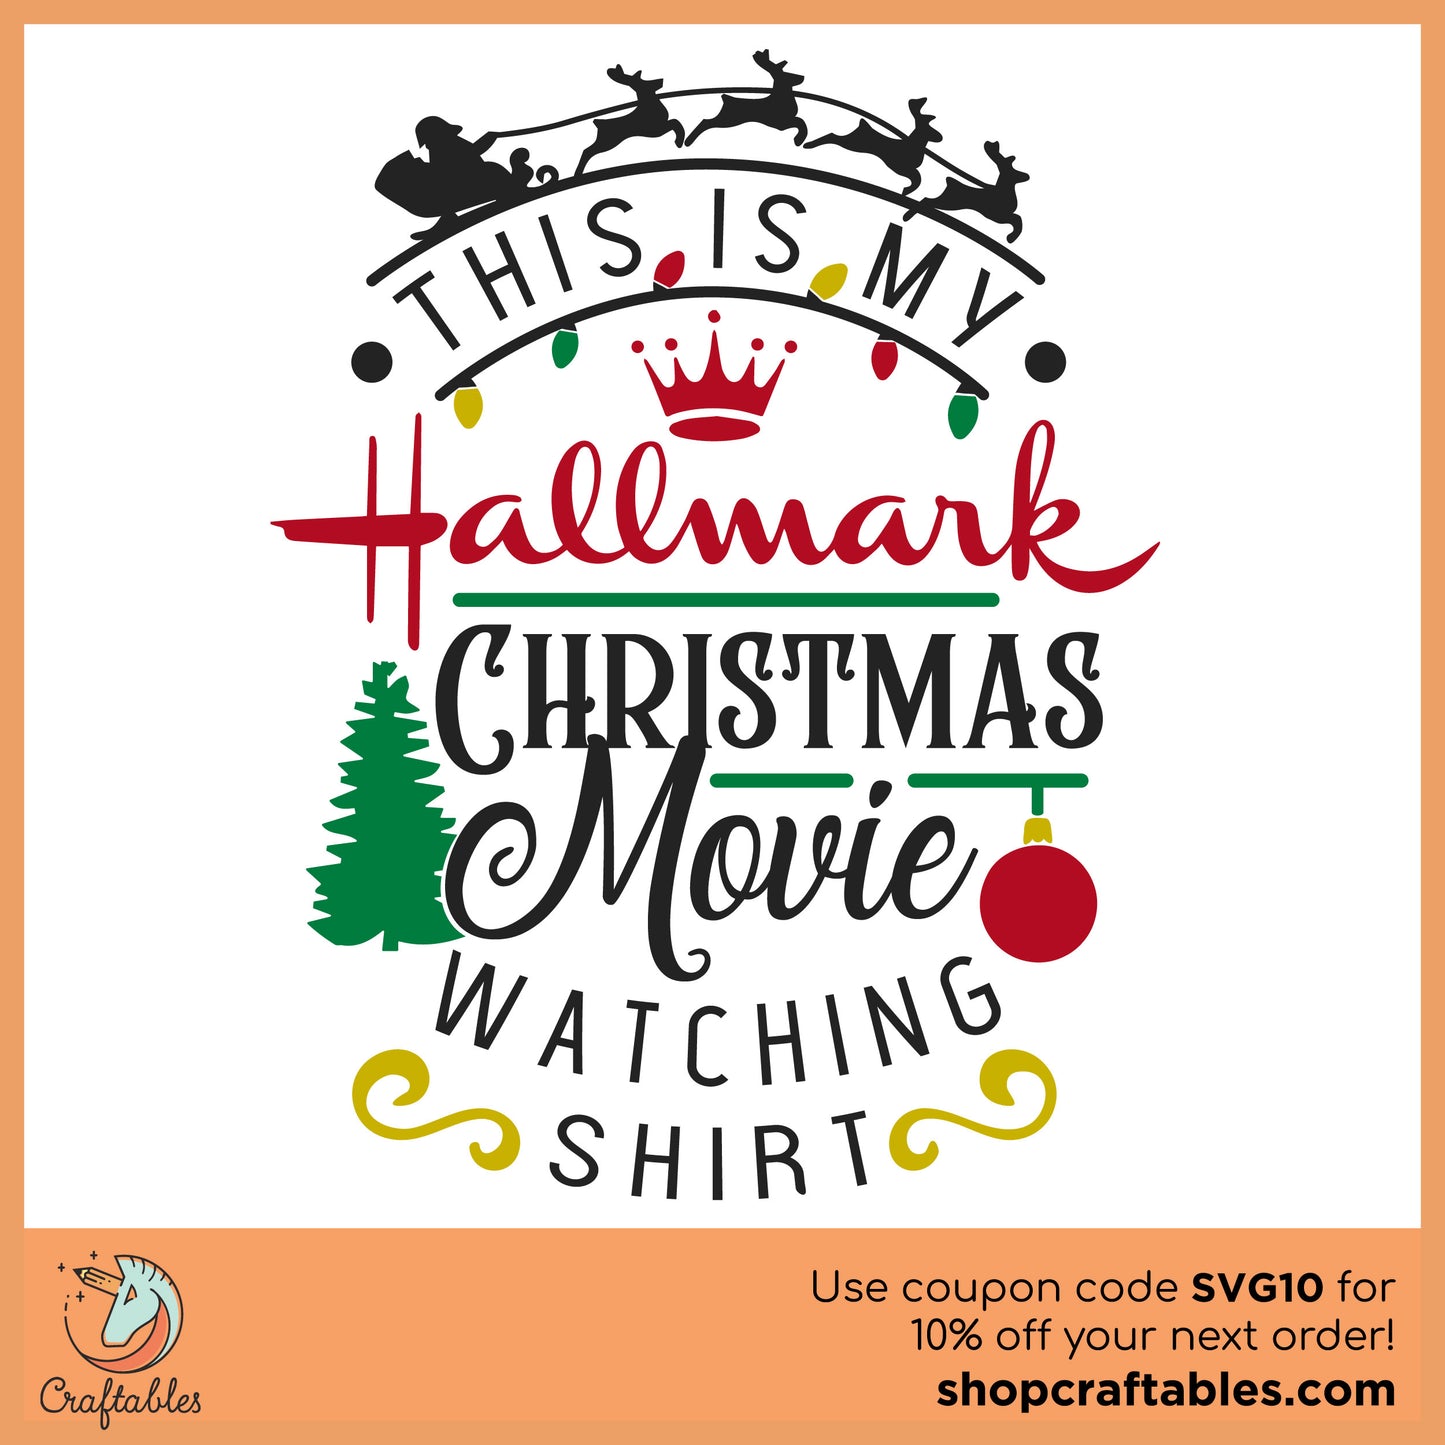 Free This Is My Hallmark Christmas Movie-Watching Shirt SVG Cut File